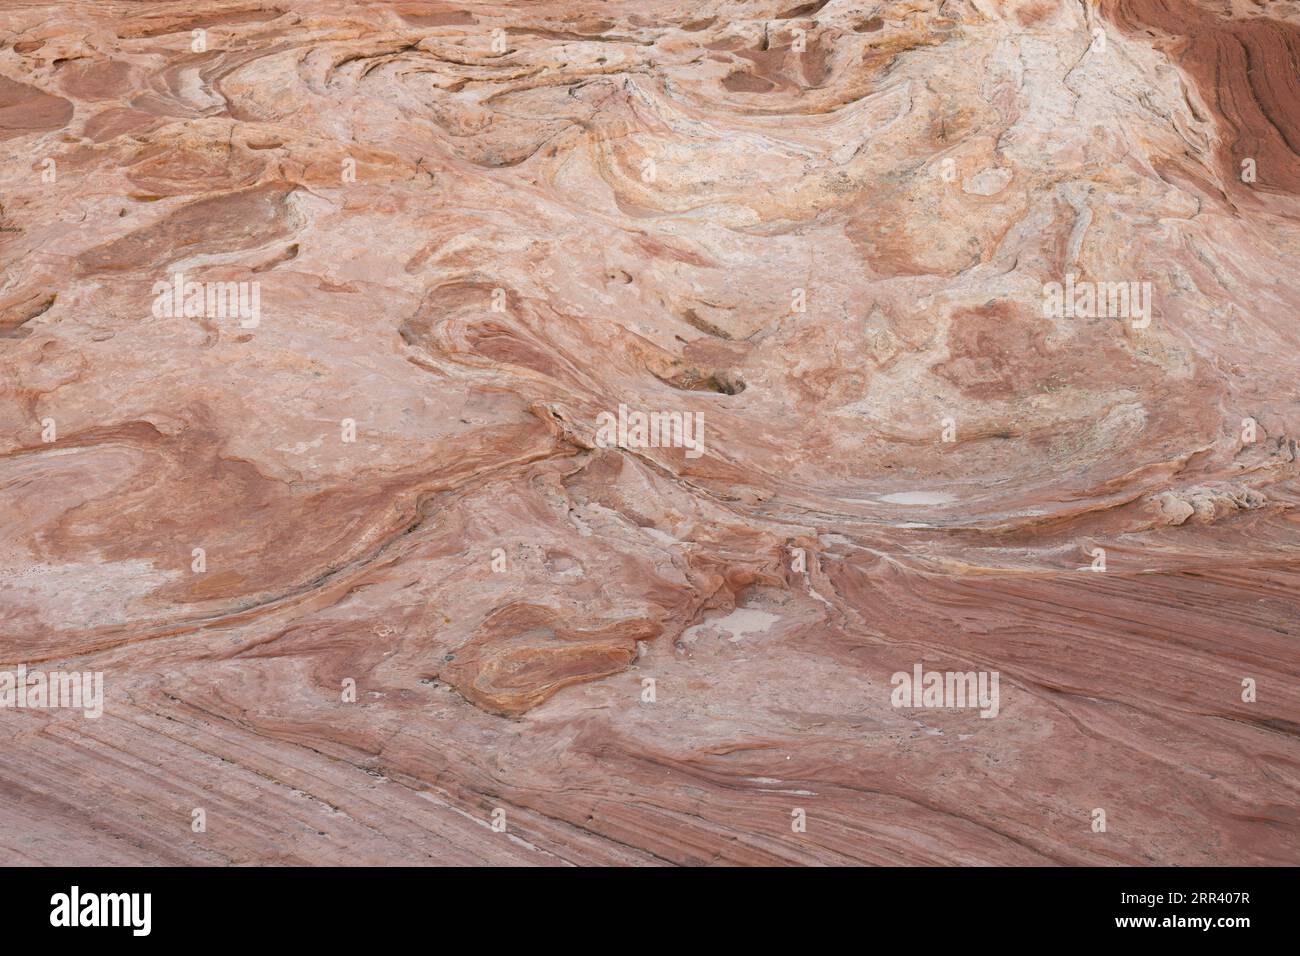 Abstract background texture of unique patterns in a stone surface with geometric patterns. Stock Photo